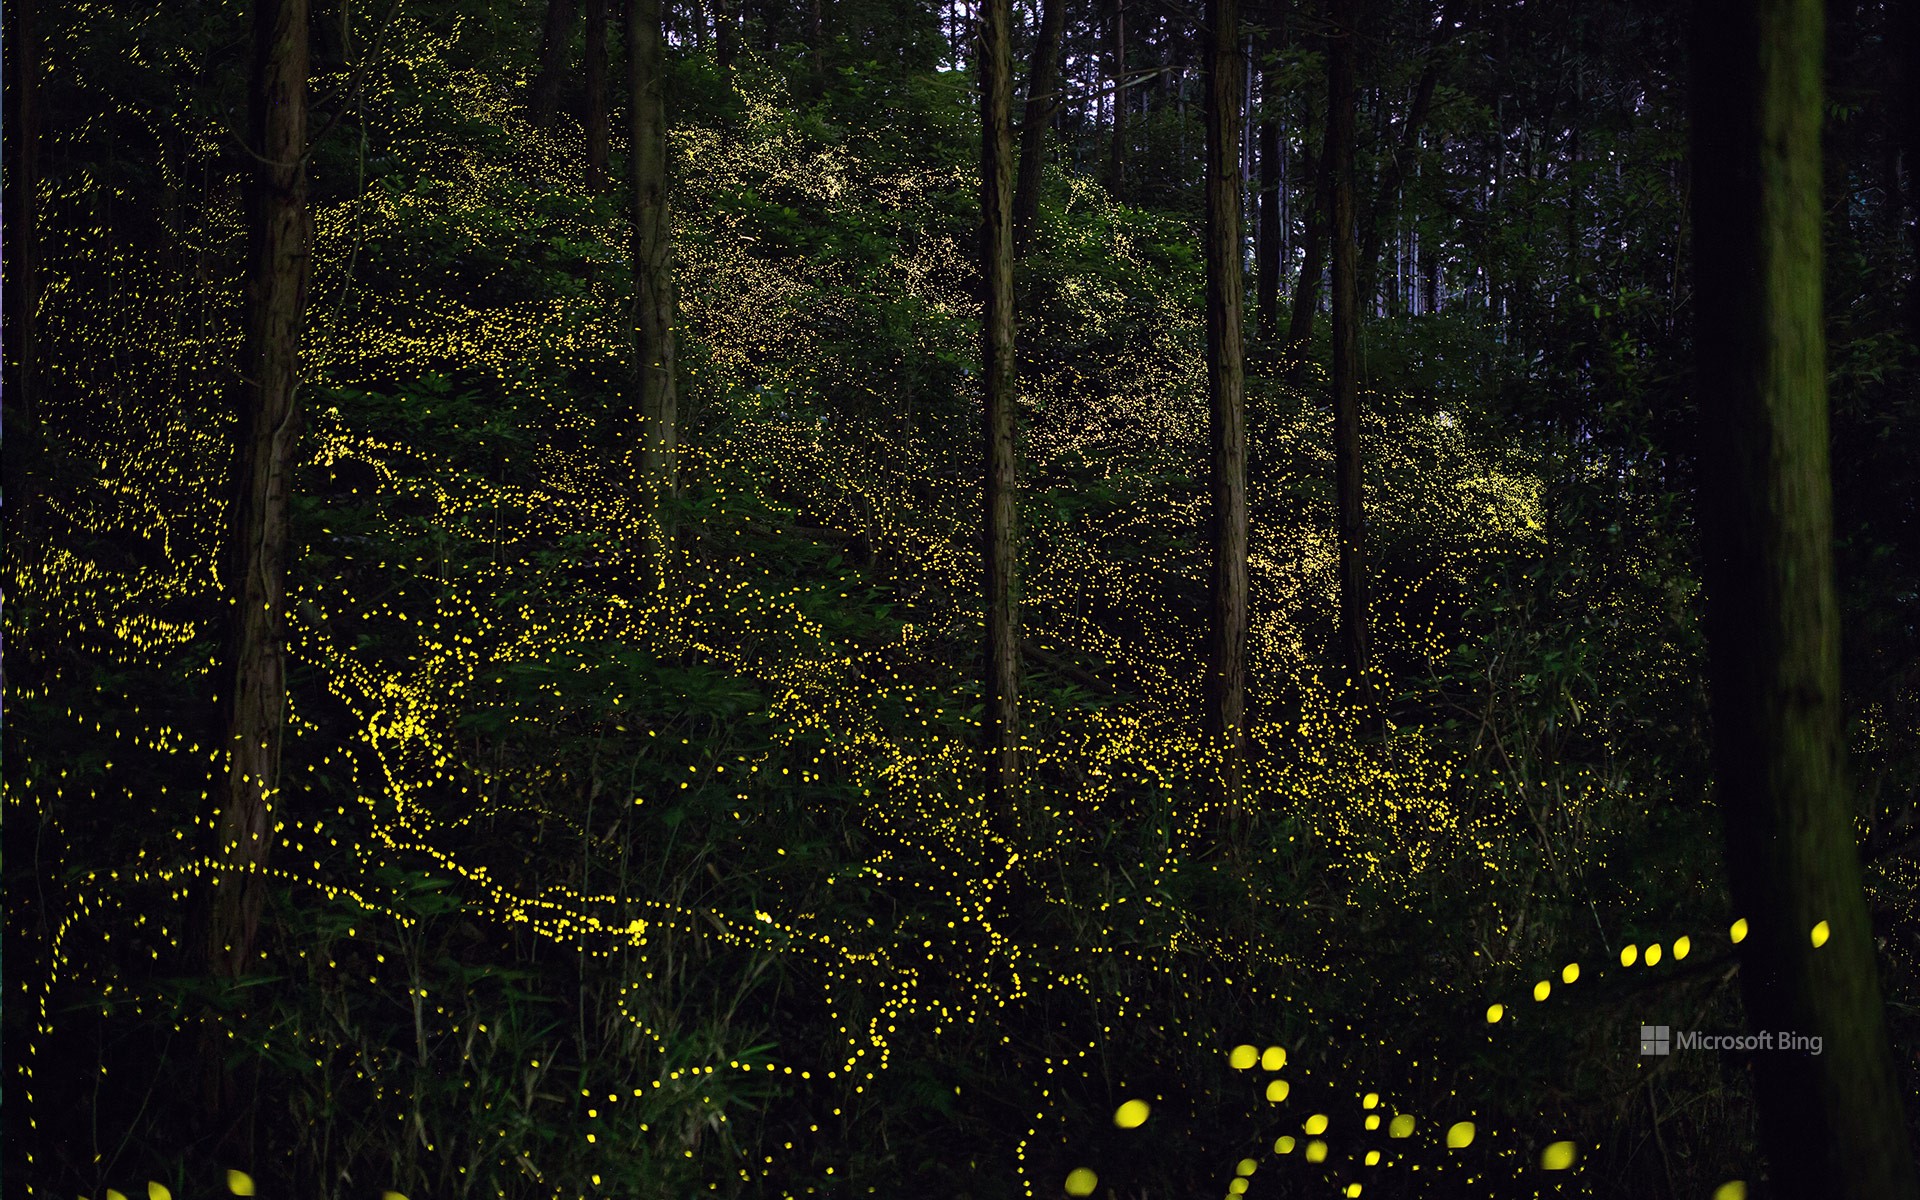 Fireflies shining in the forest